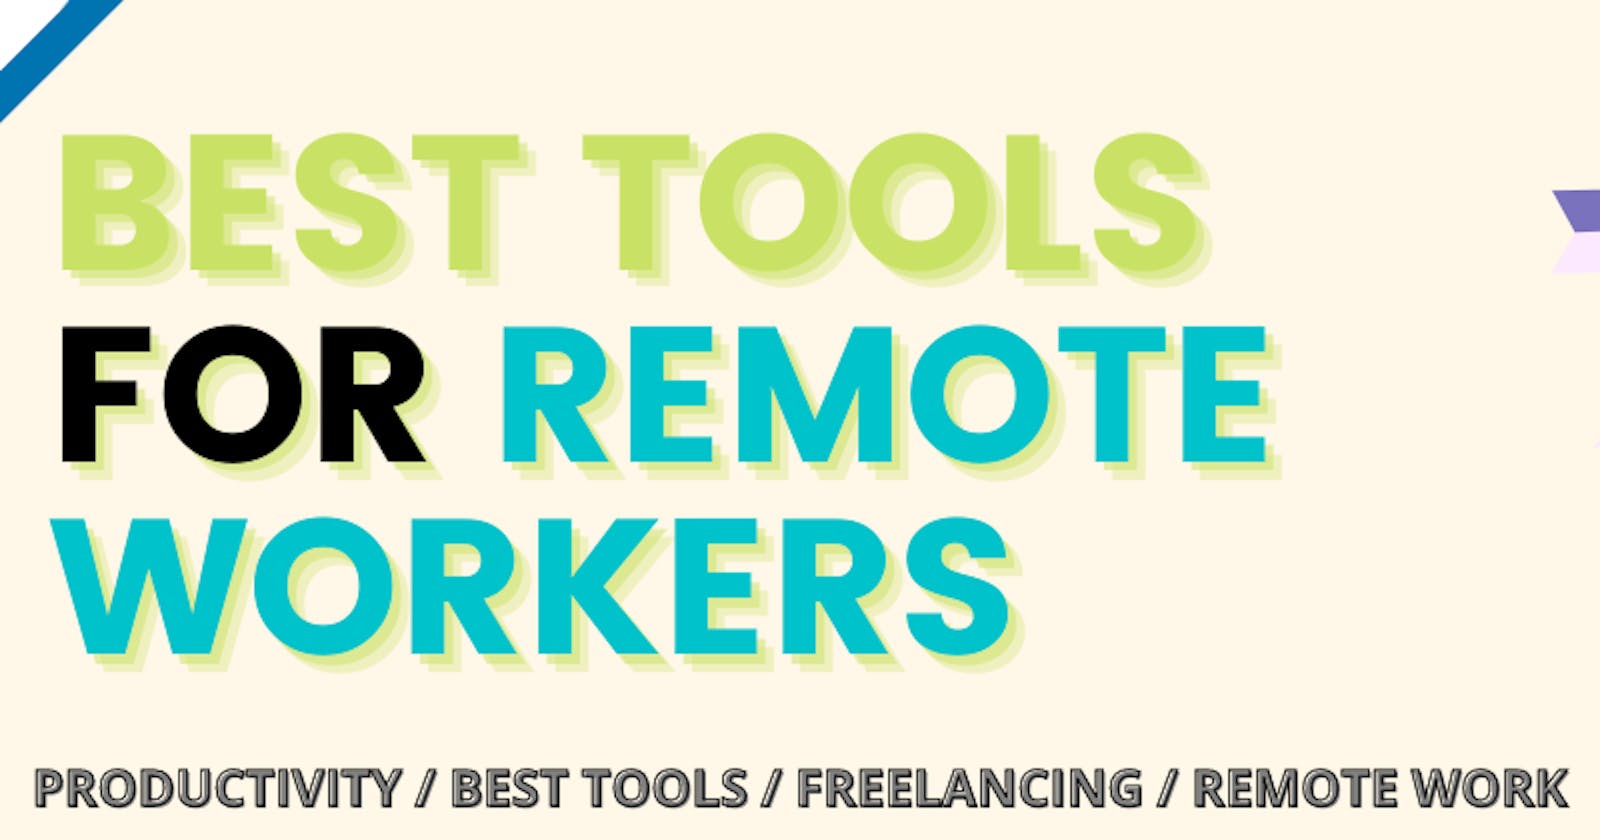 8 Best tools for remote workers